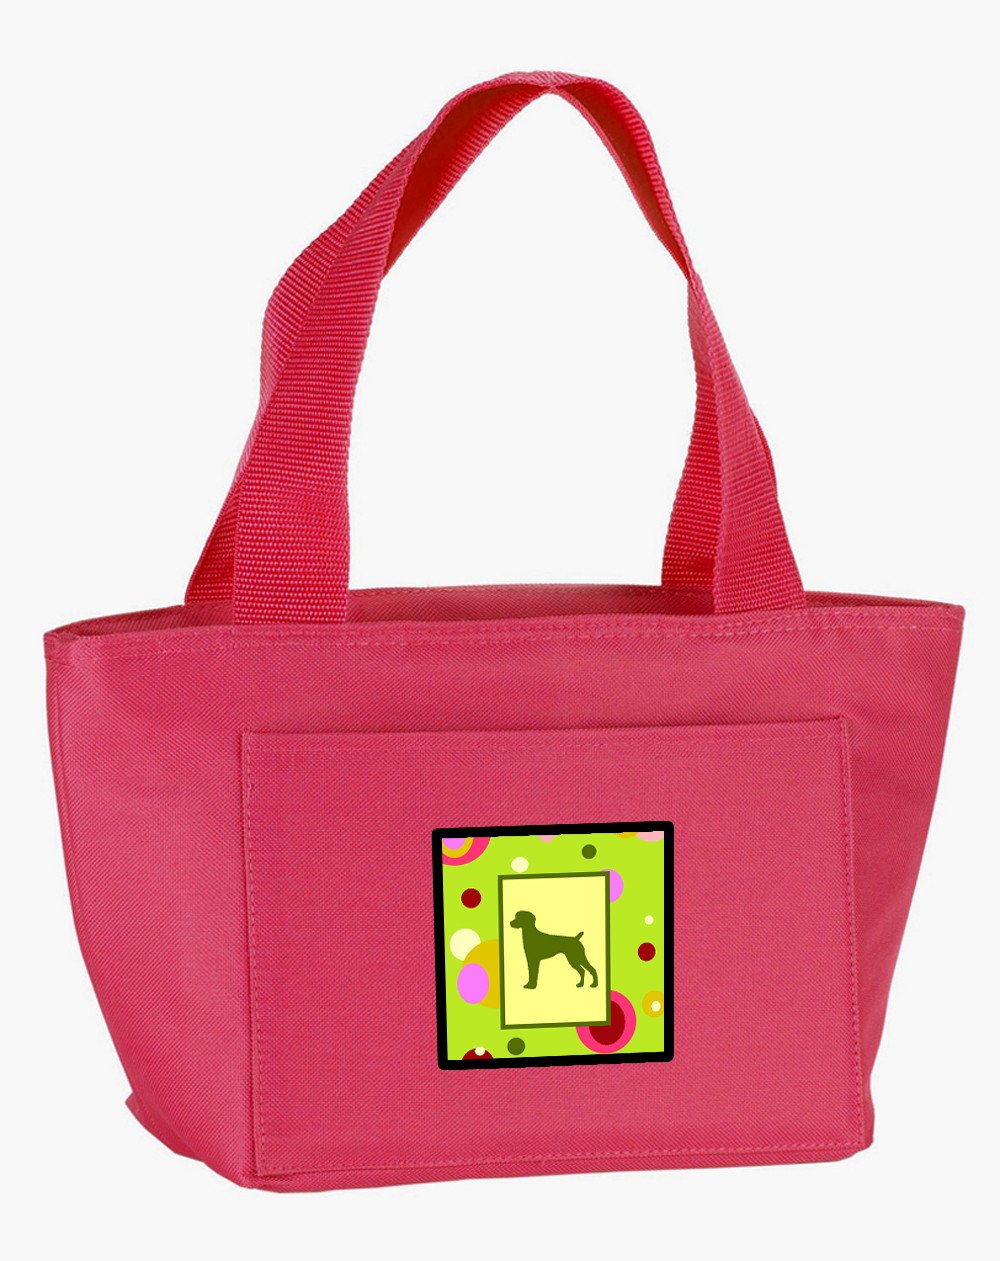 Lime Green Dots German Shorthaired Pointer  Lunch Bag CK1035PK-8808 by Caroline's Treasures